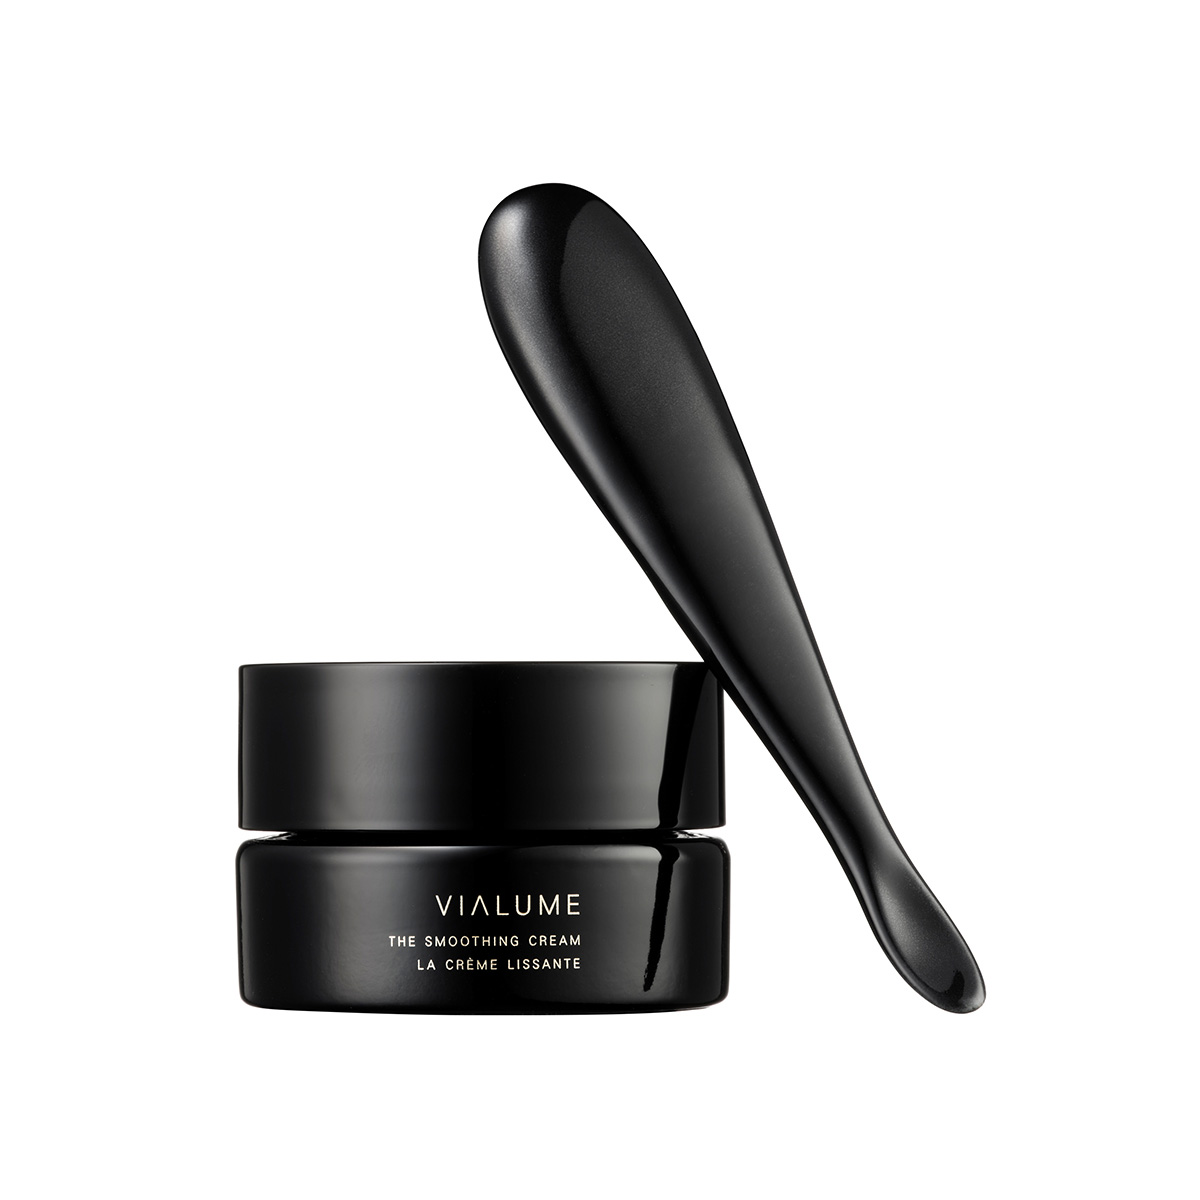 VIALUME THE SMOOTHING CREAM